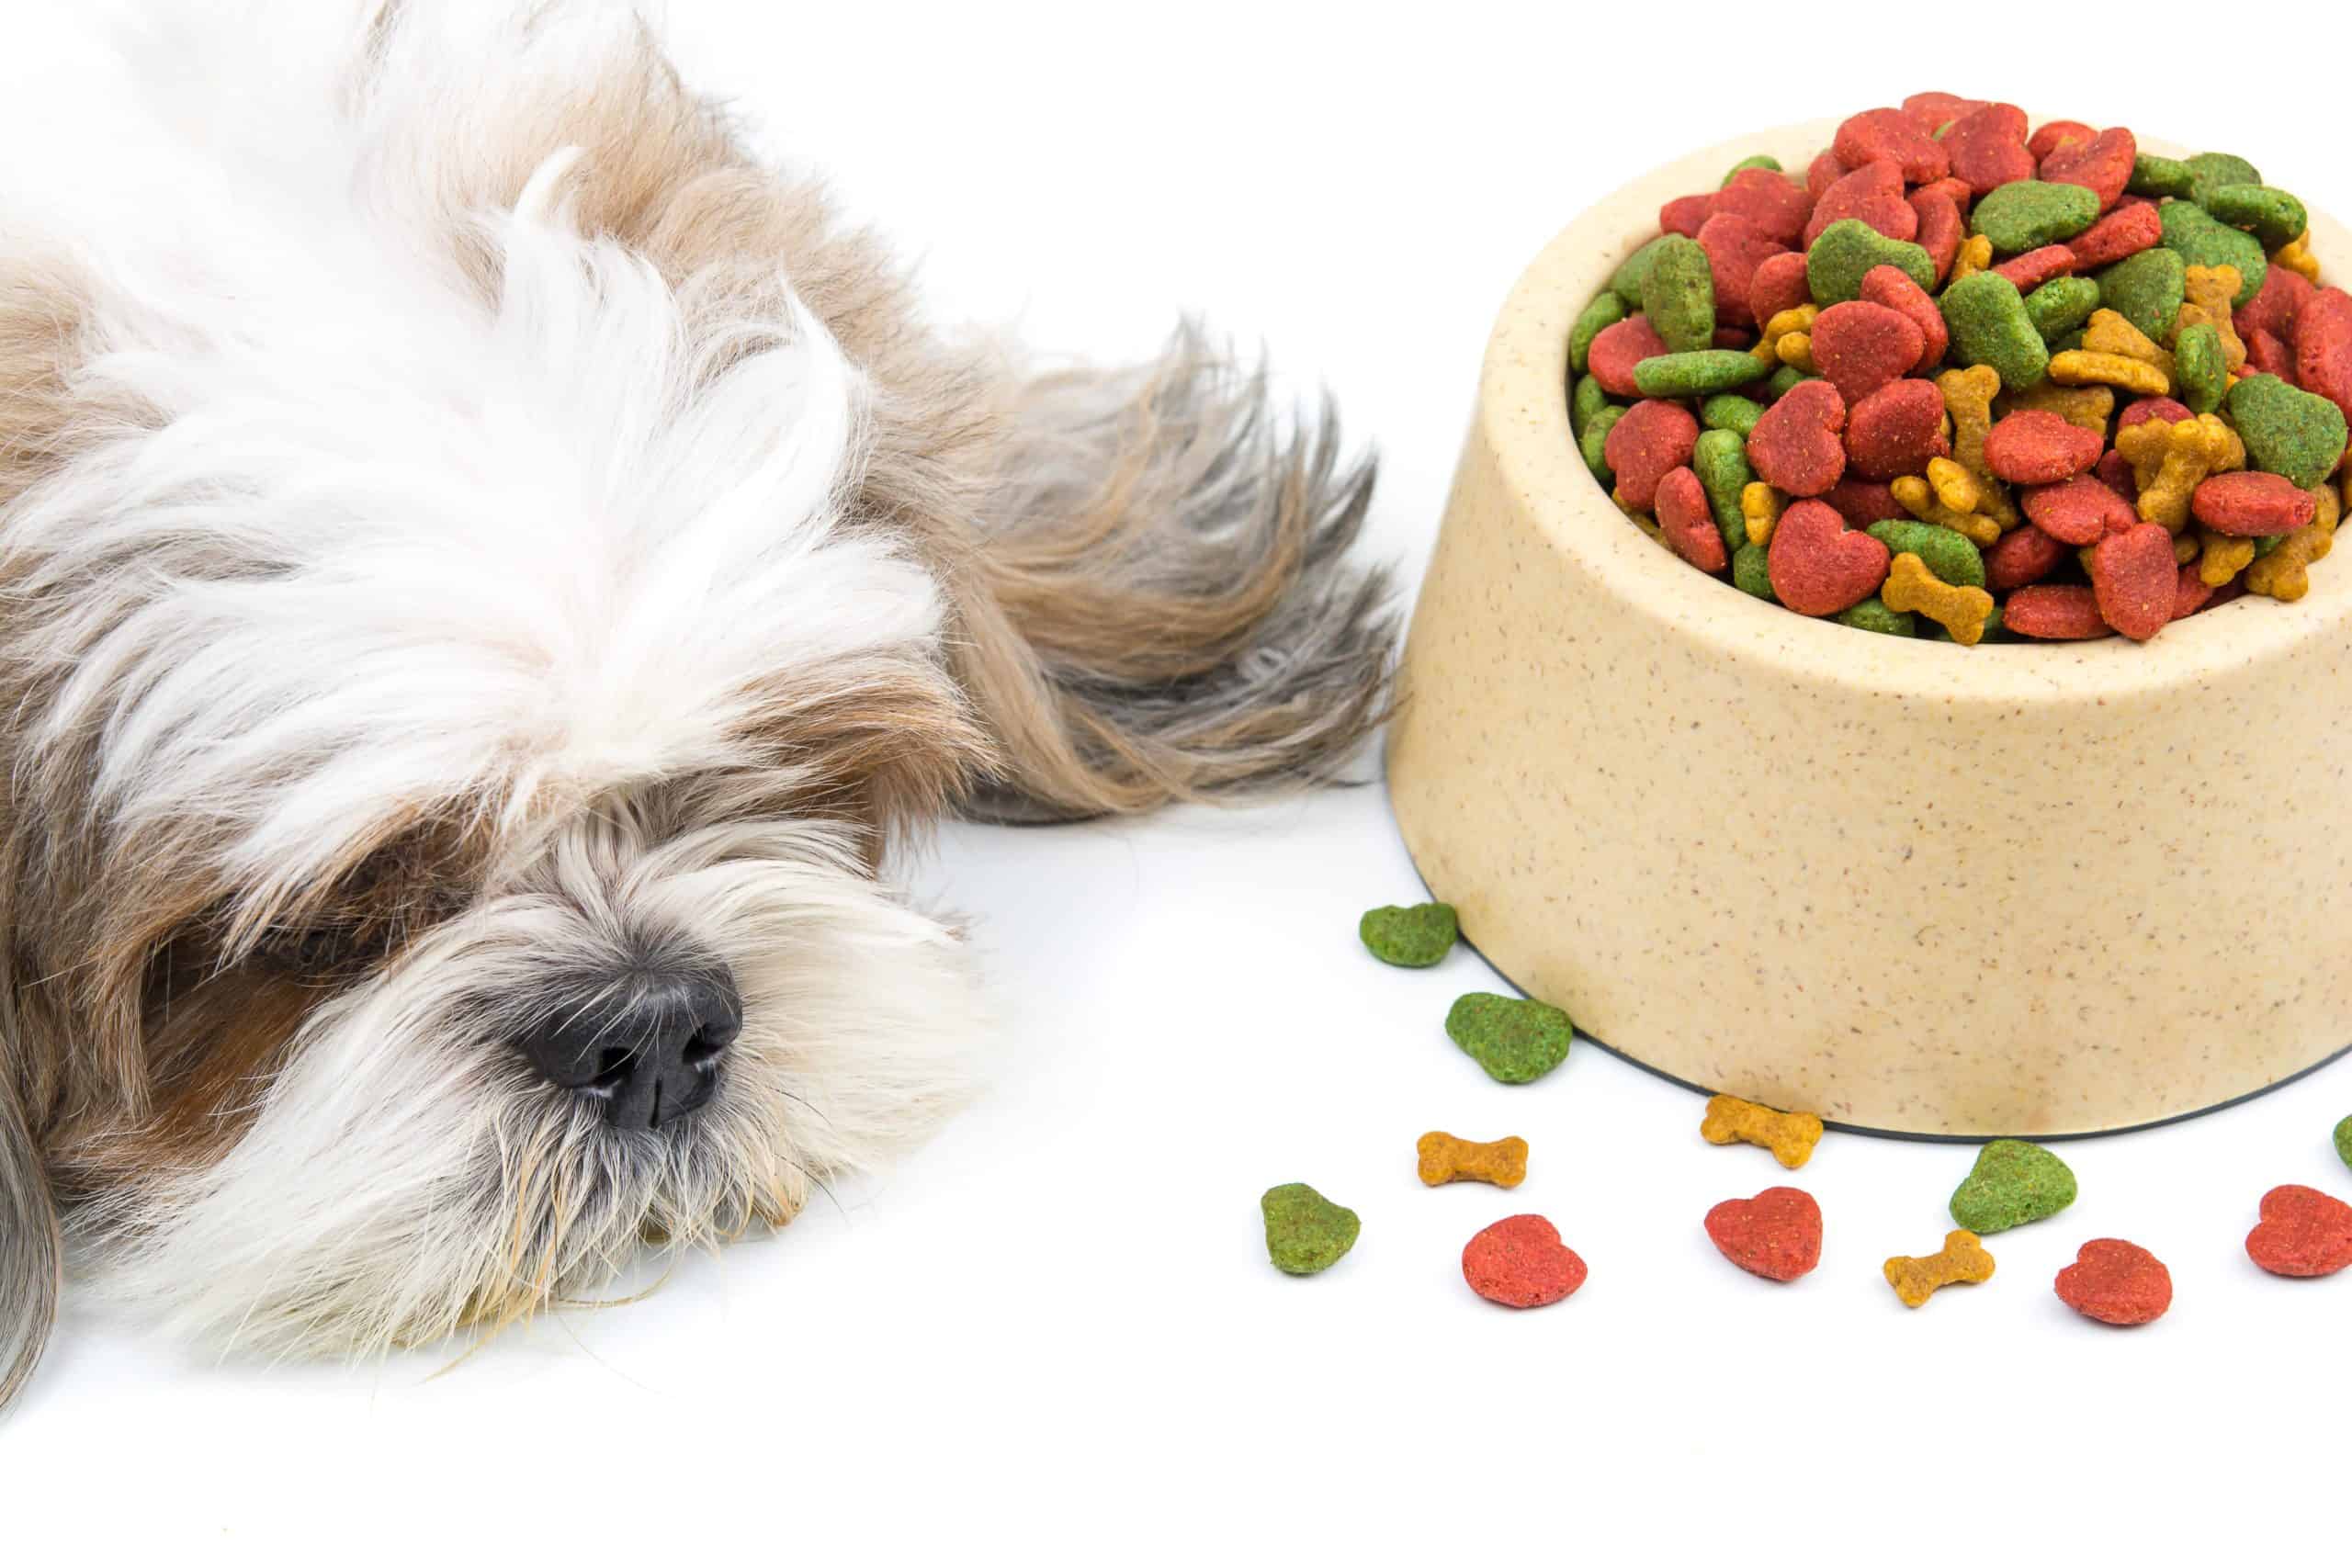 Bored Shih Tzu lies near bowl of commercial dog food. Take three steps to improve your dog's diet. Start by buying with caution, adding raw foods, and eliminating gluten.